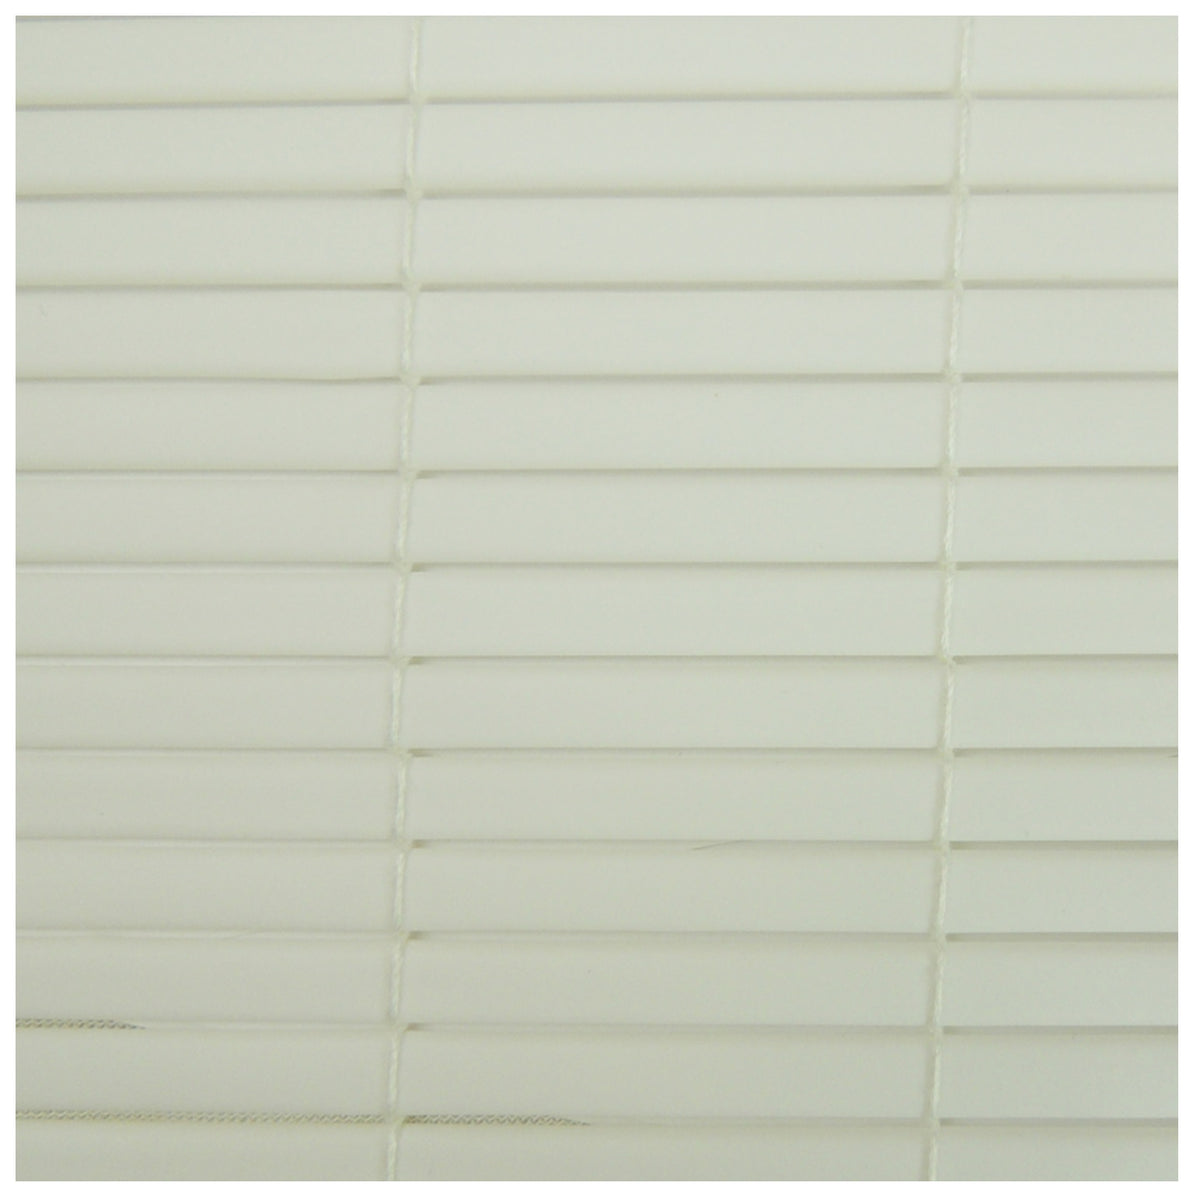 Radiance 3320156 Rollup Shade, 60" x 72"